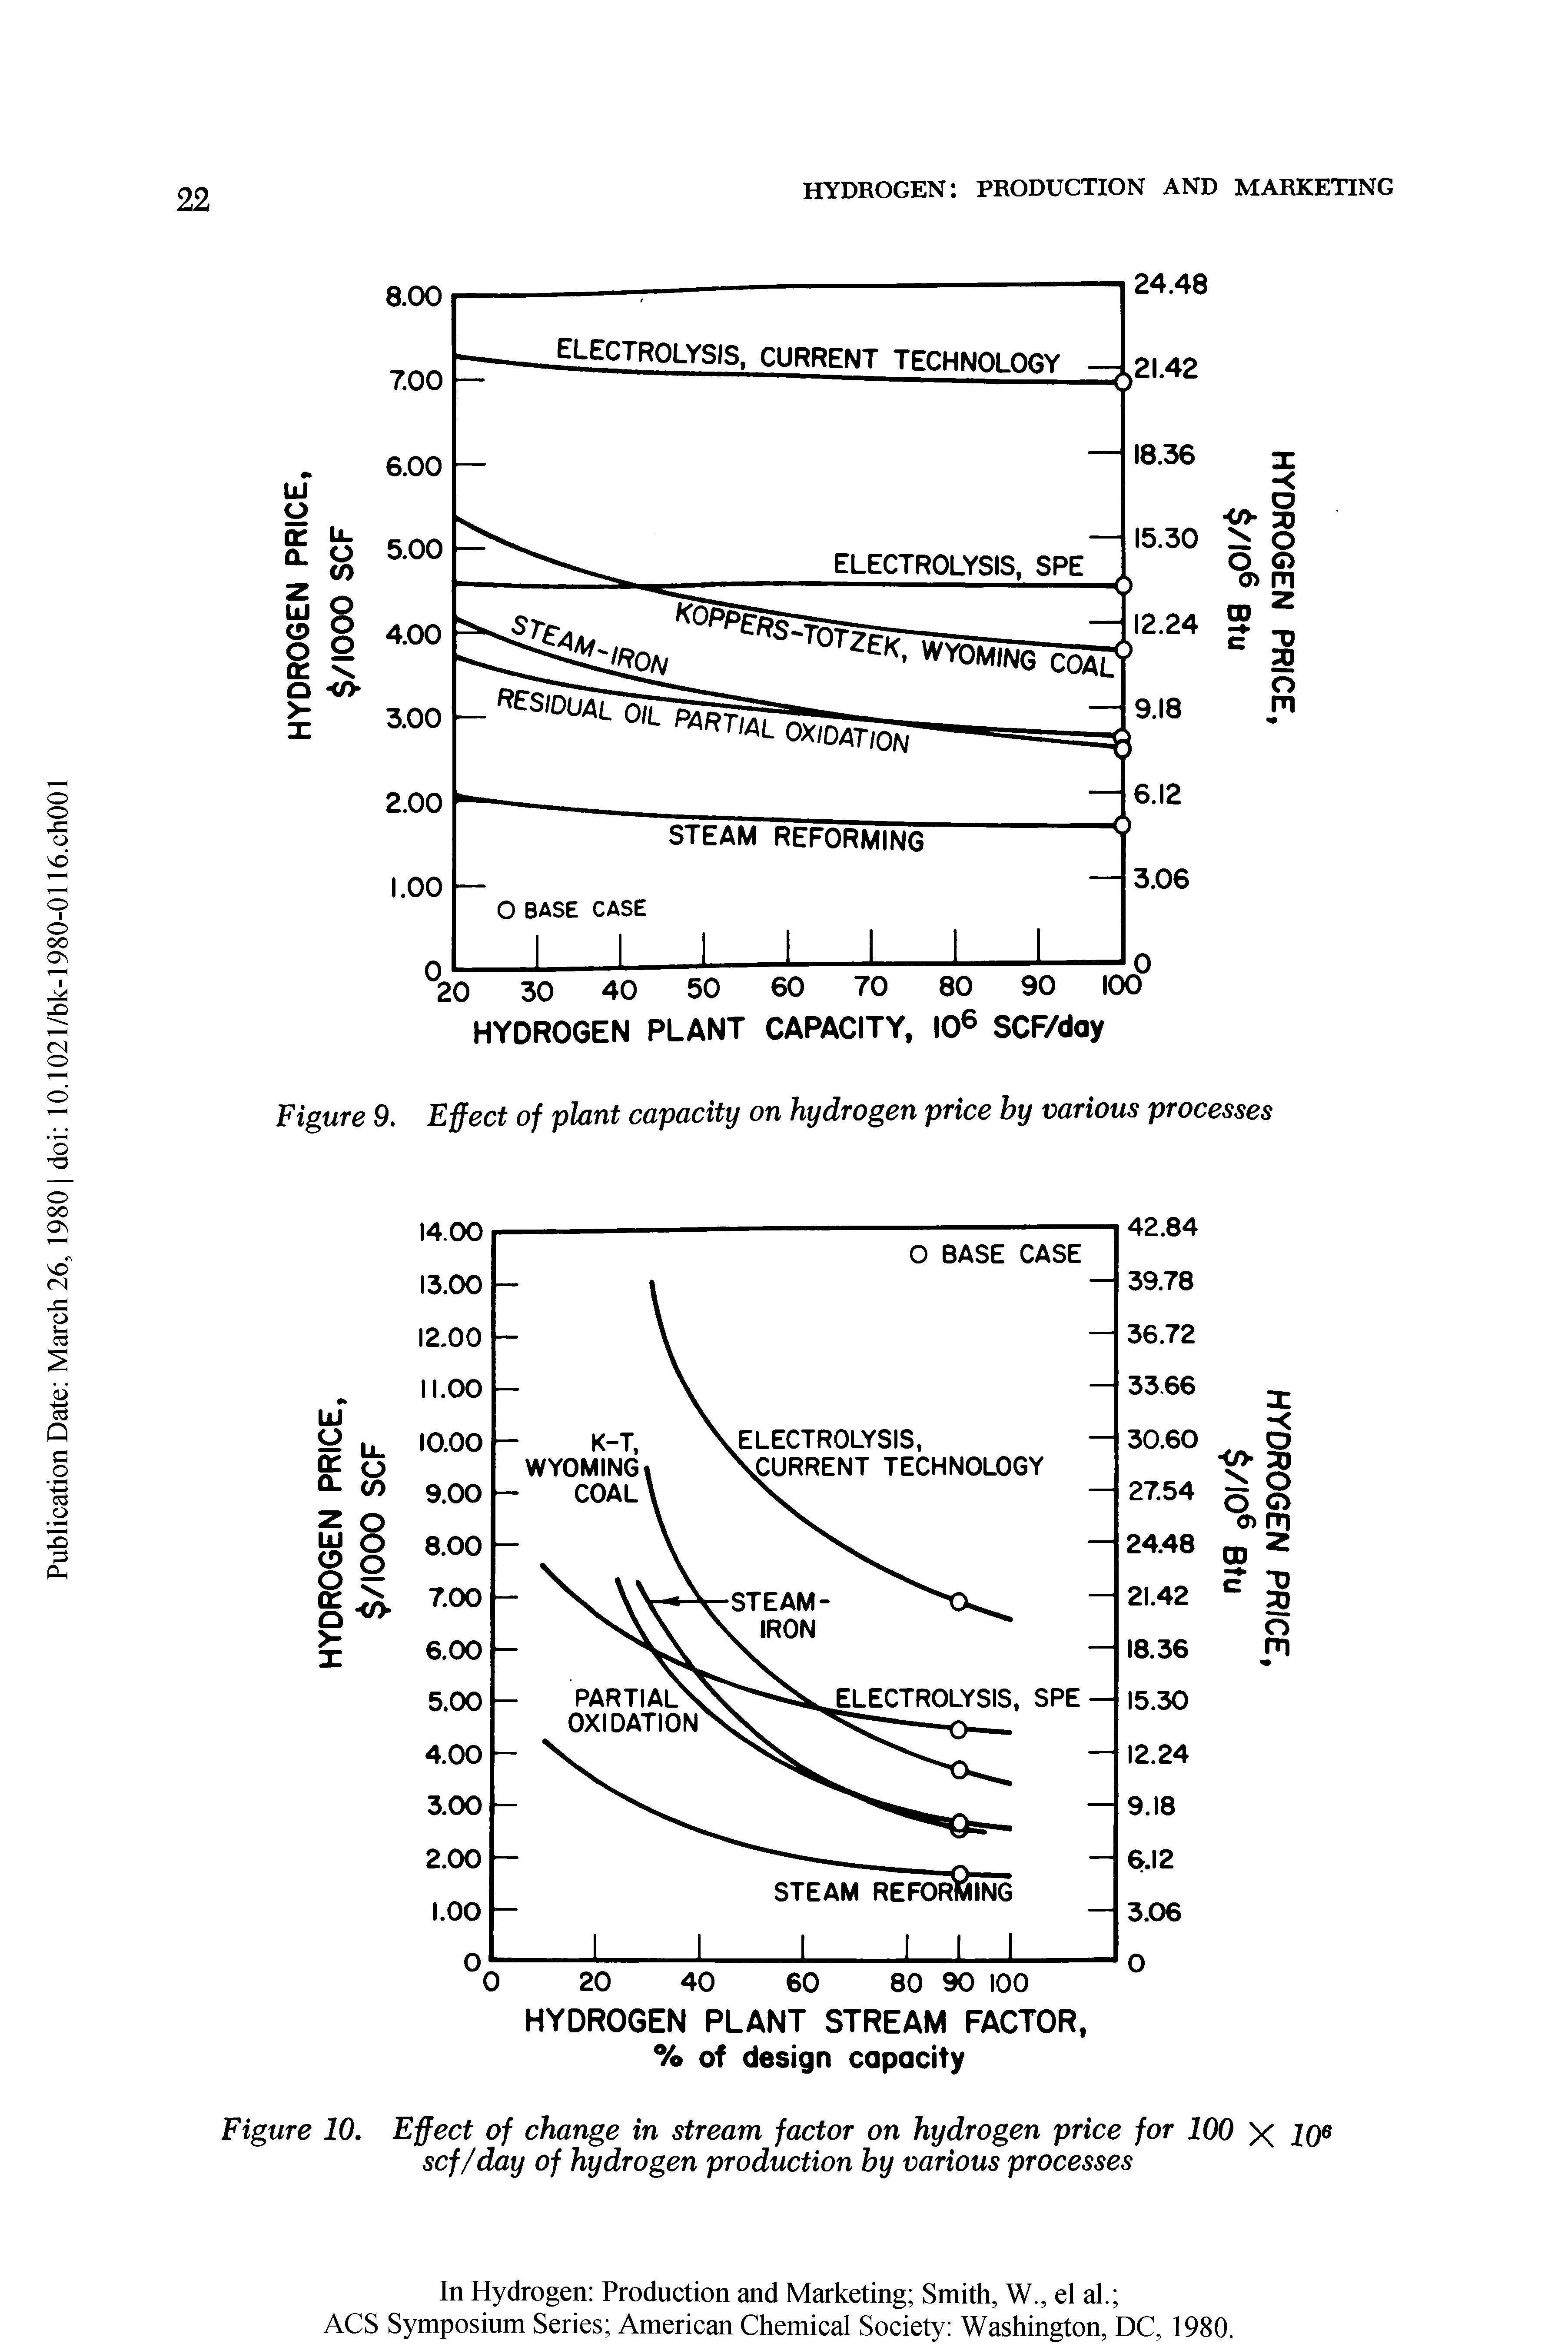 Figure 10. Effect of change in stream factor on hydrogen price for 100 X 106 scf/day of hydrogen production hy various processes...